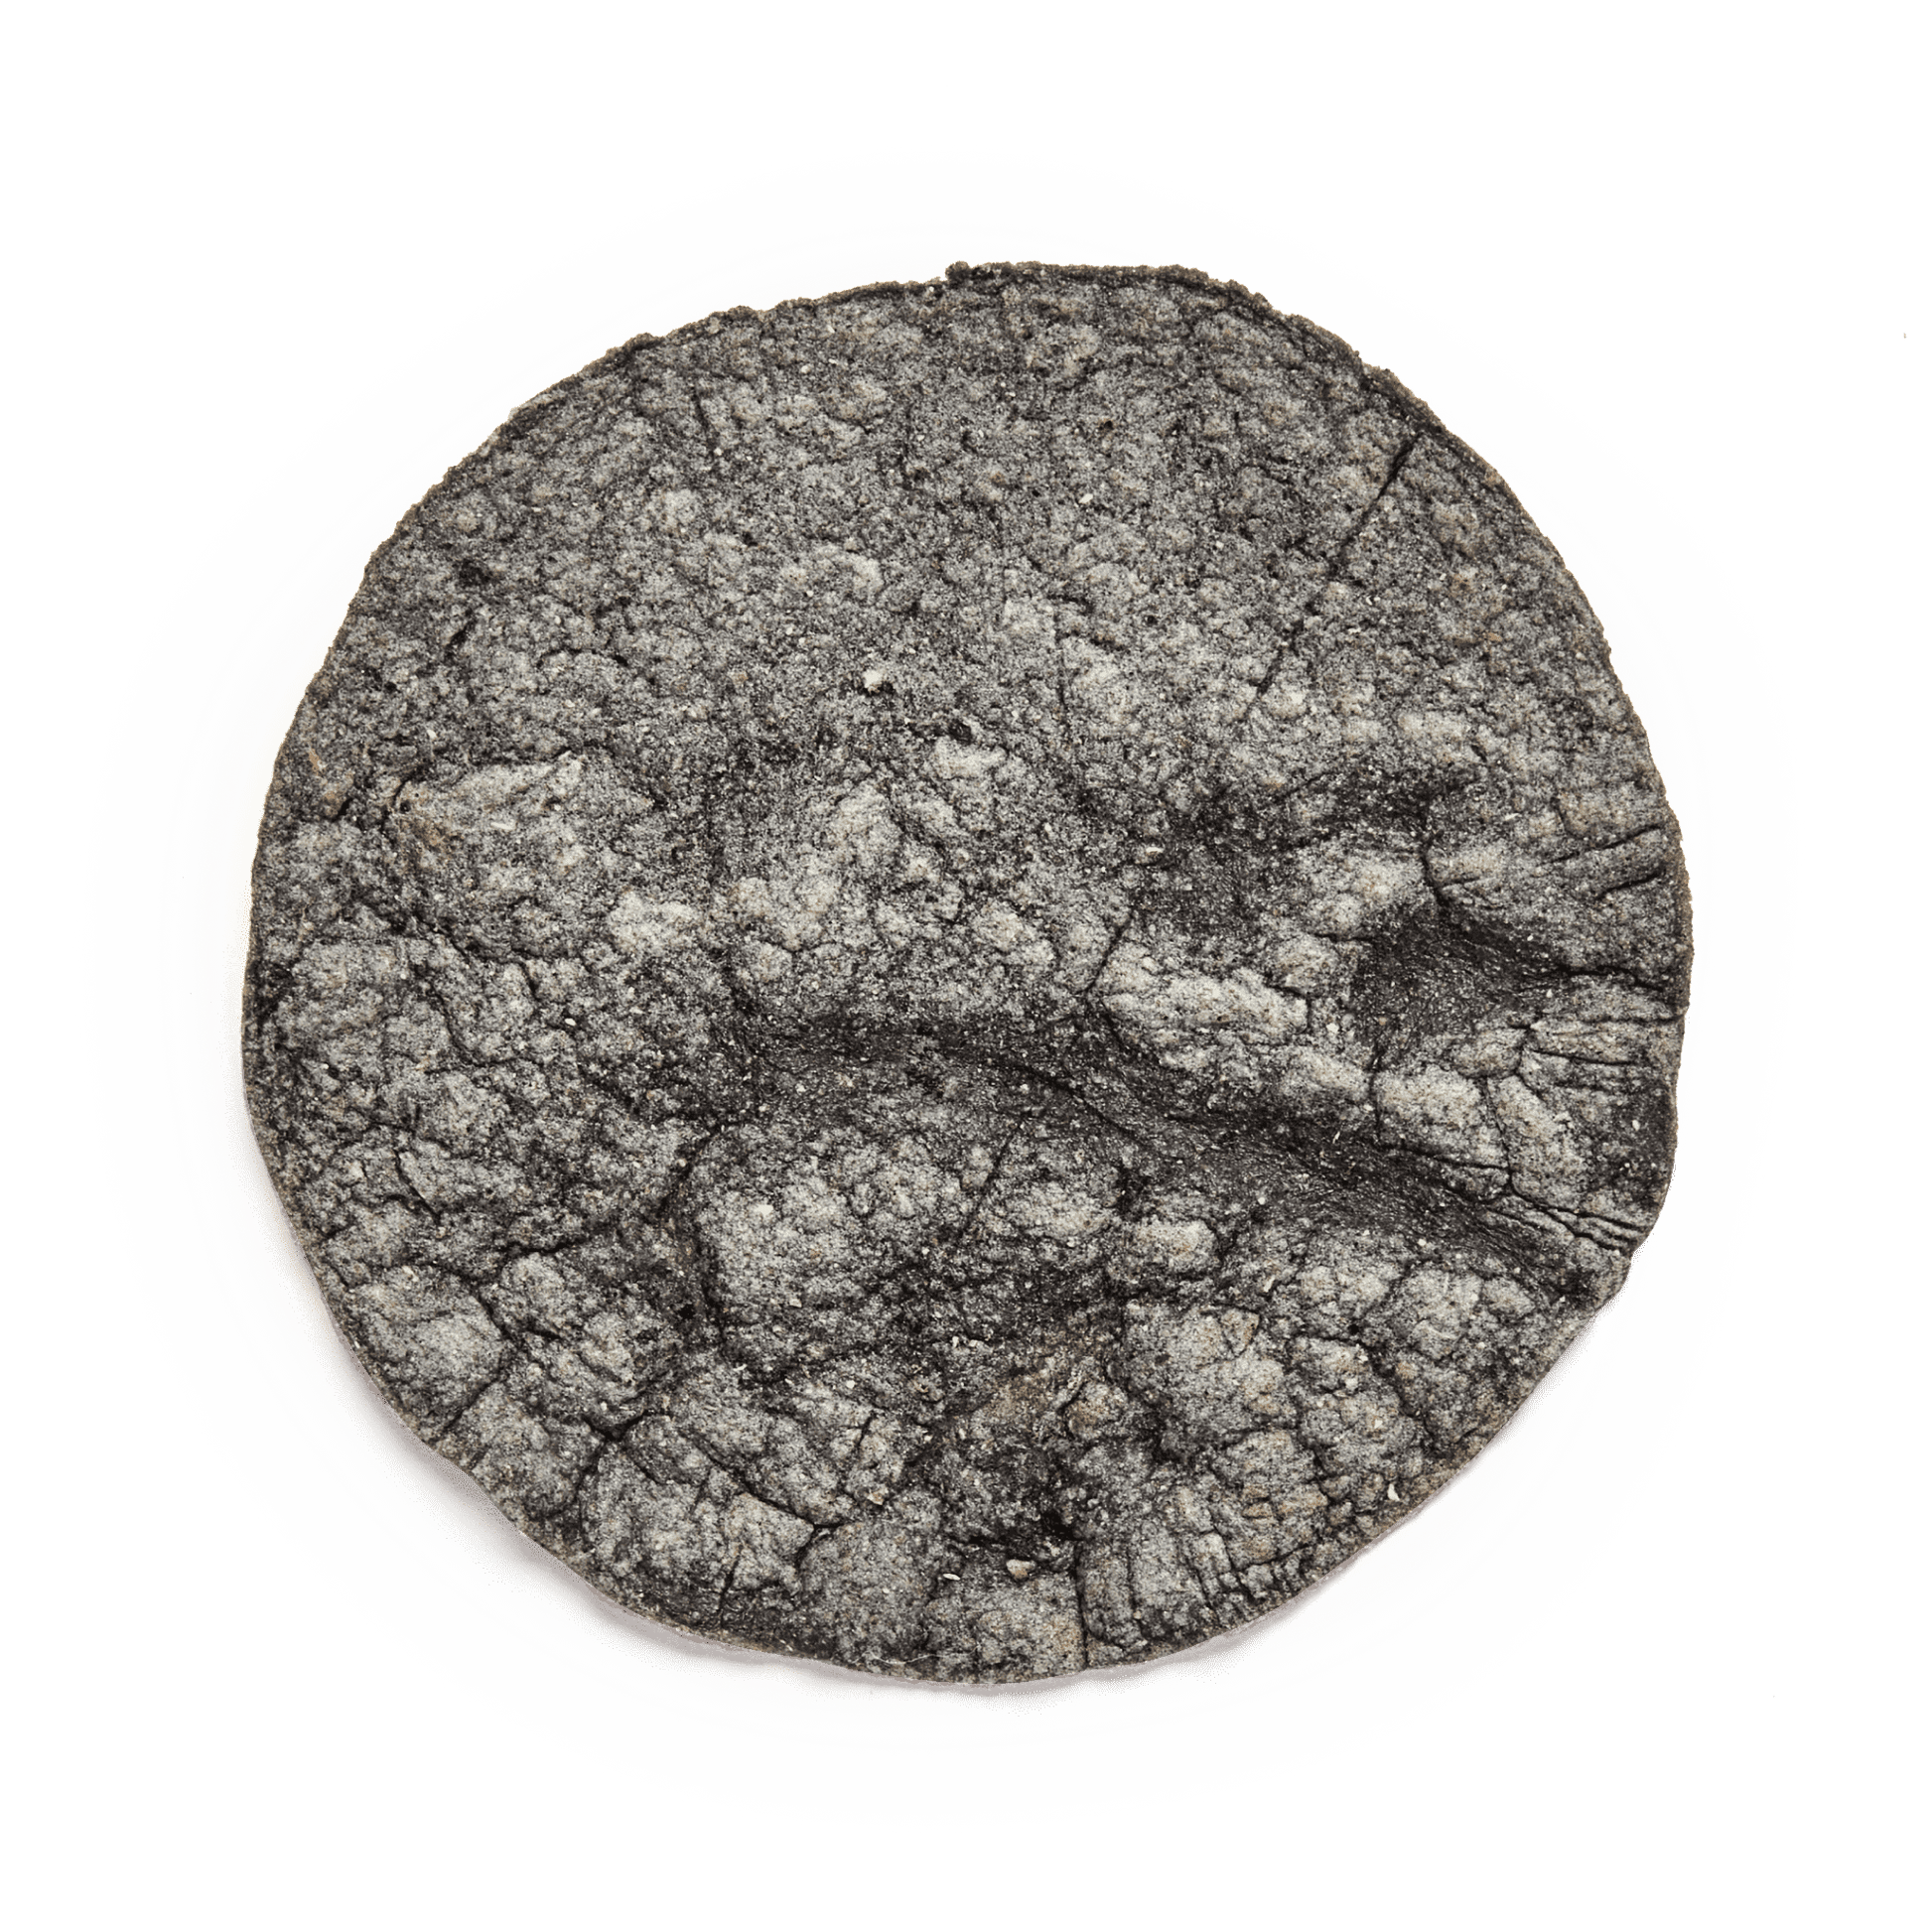 Masienda's best-selling Heirloom Blue Corn Masa Harina is a fine-ground nixtamalized corn flour. Its deep flavor comes from high quality heirloom corn, which is cooked, slow dried and milled to perfection in small batches. Never genetically modified. Always gluten-free.